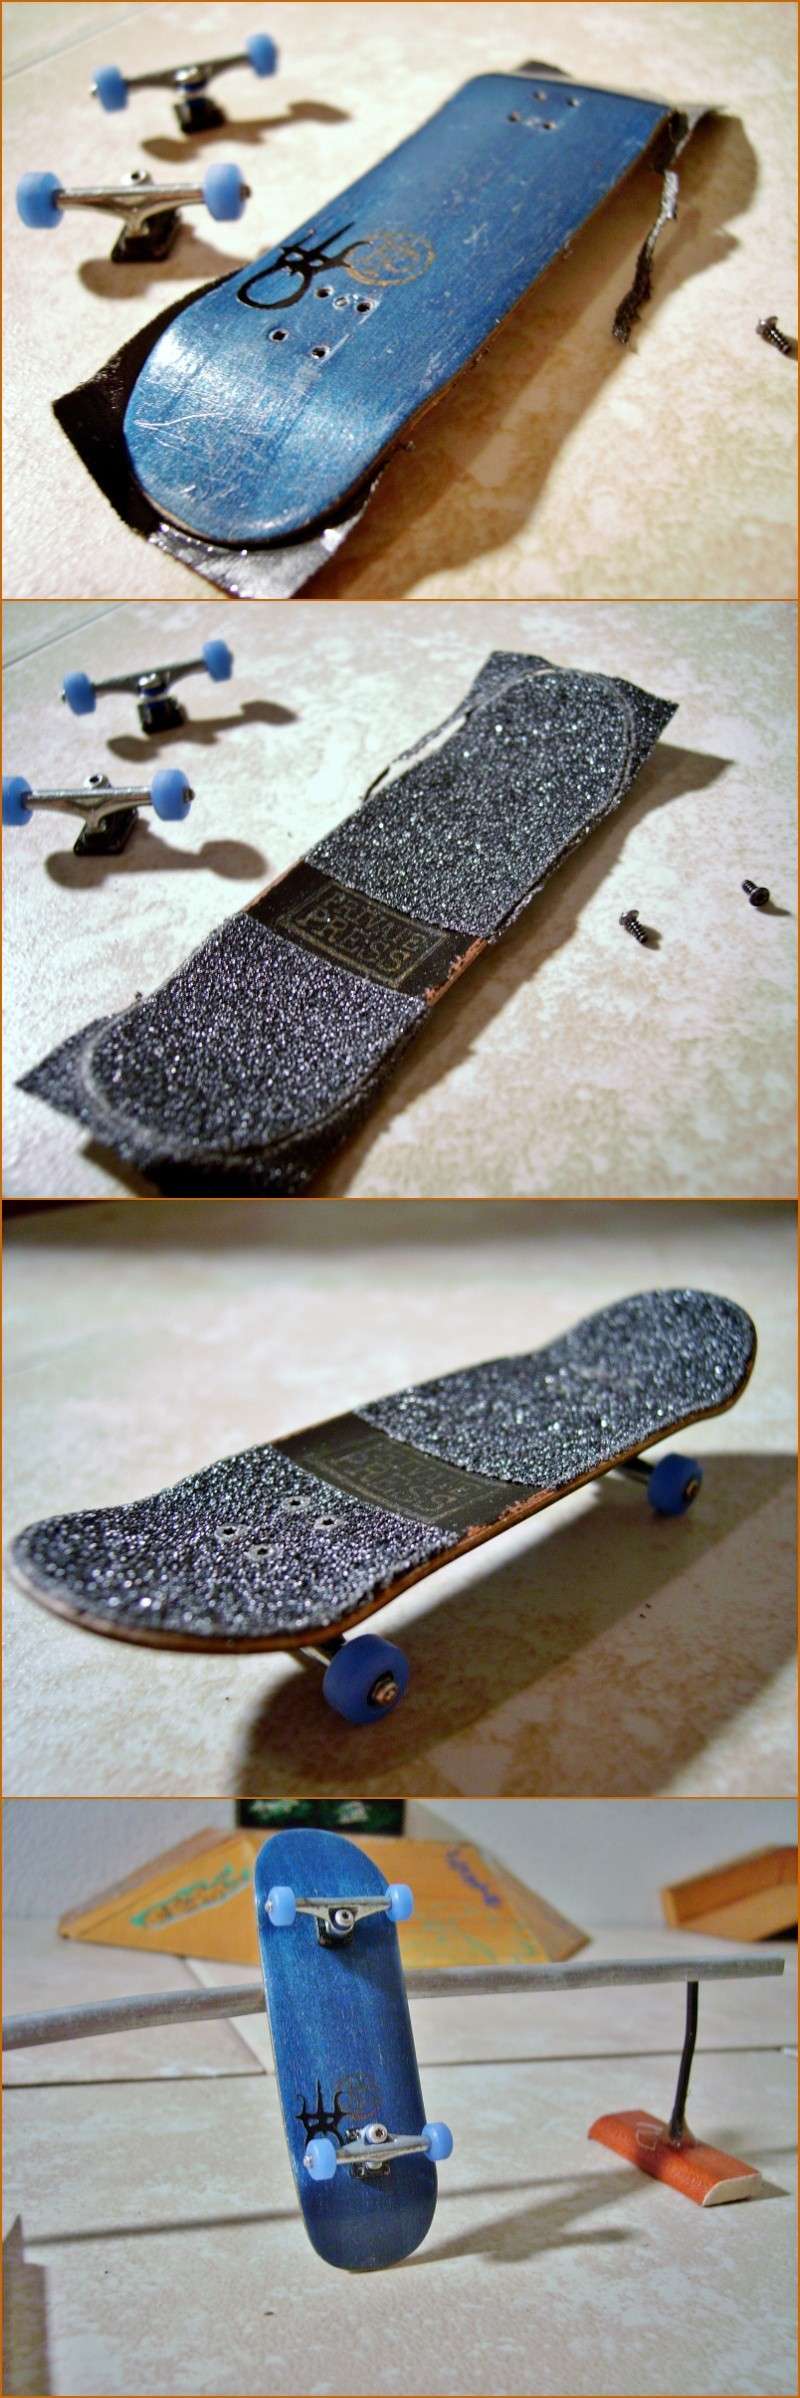 Post your fingerboard pictures! - Page 5 Fotor020